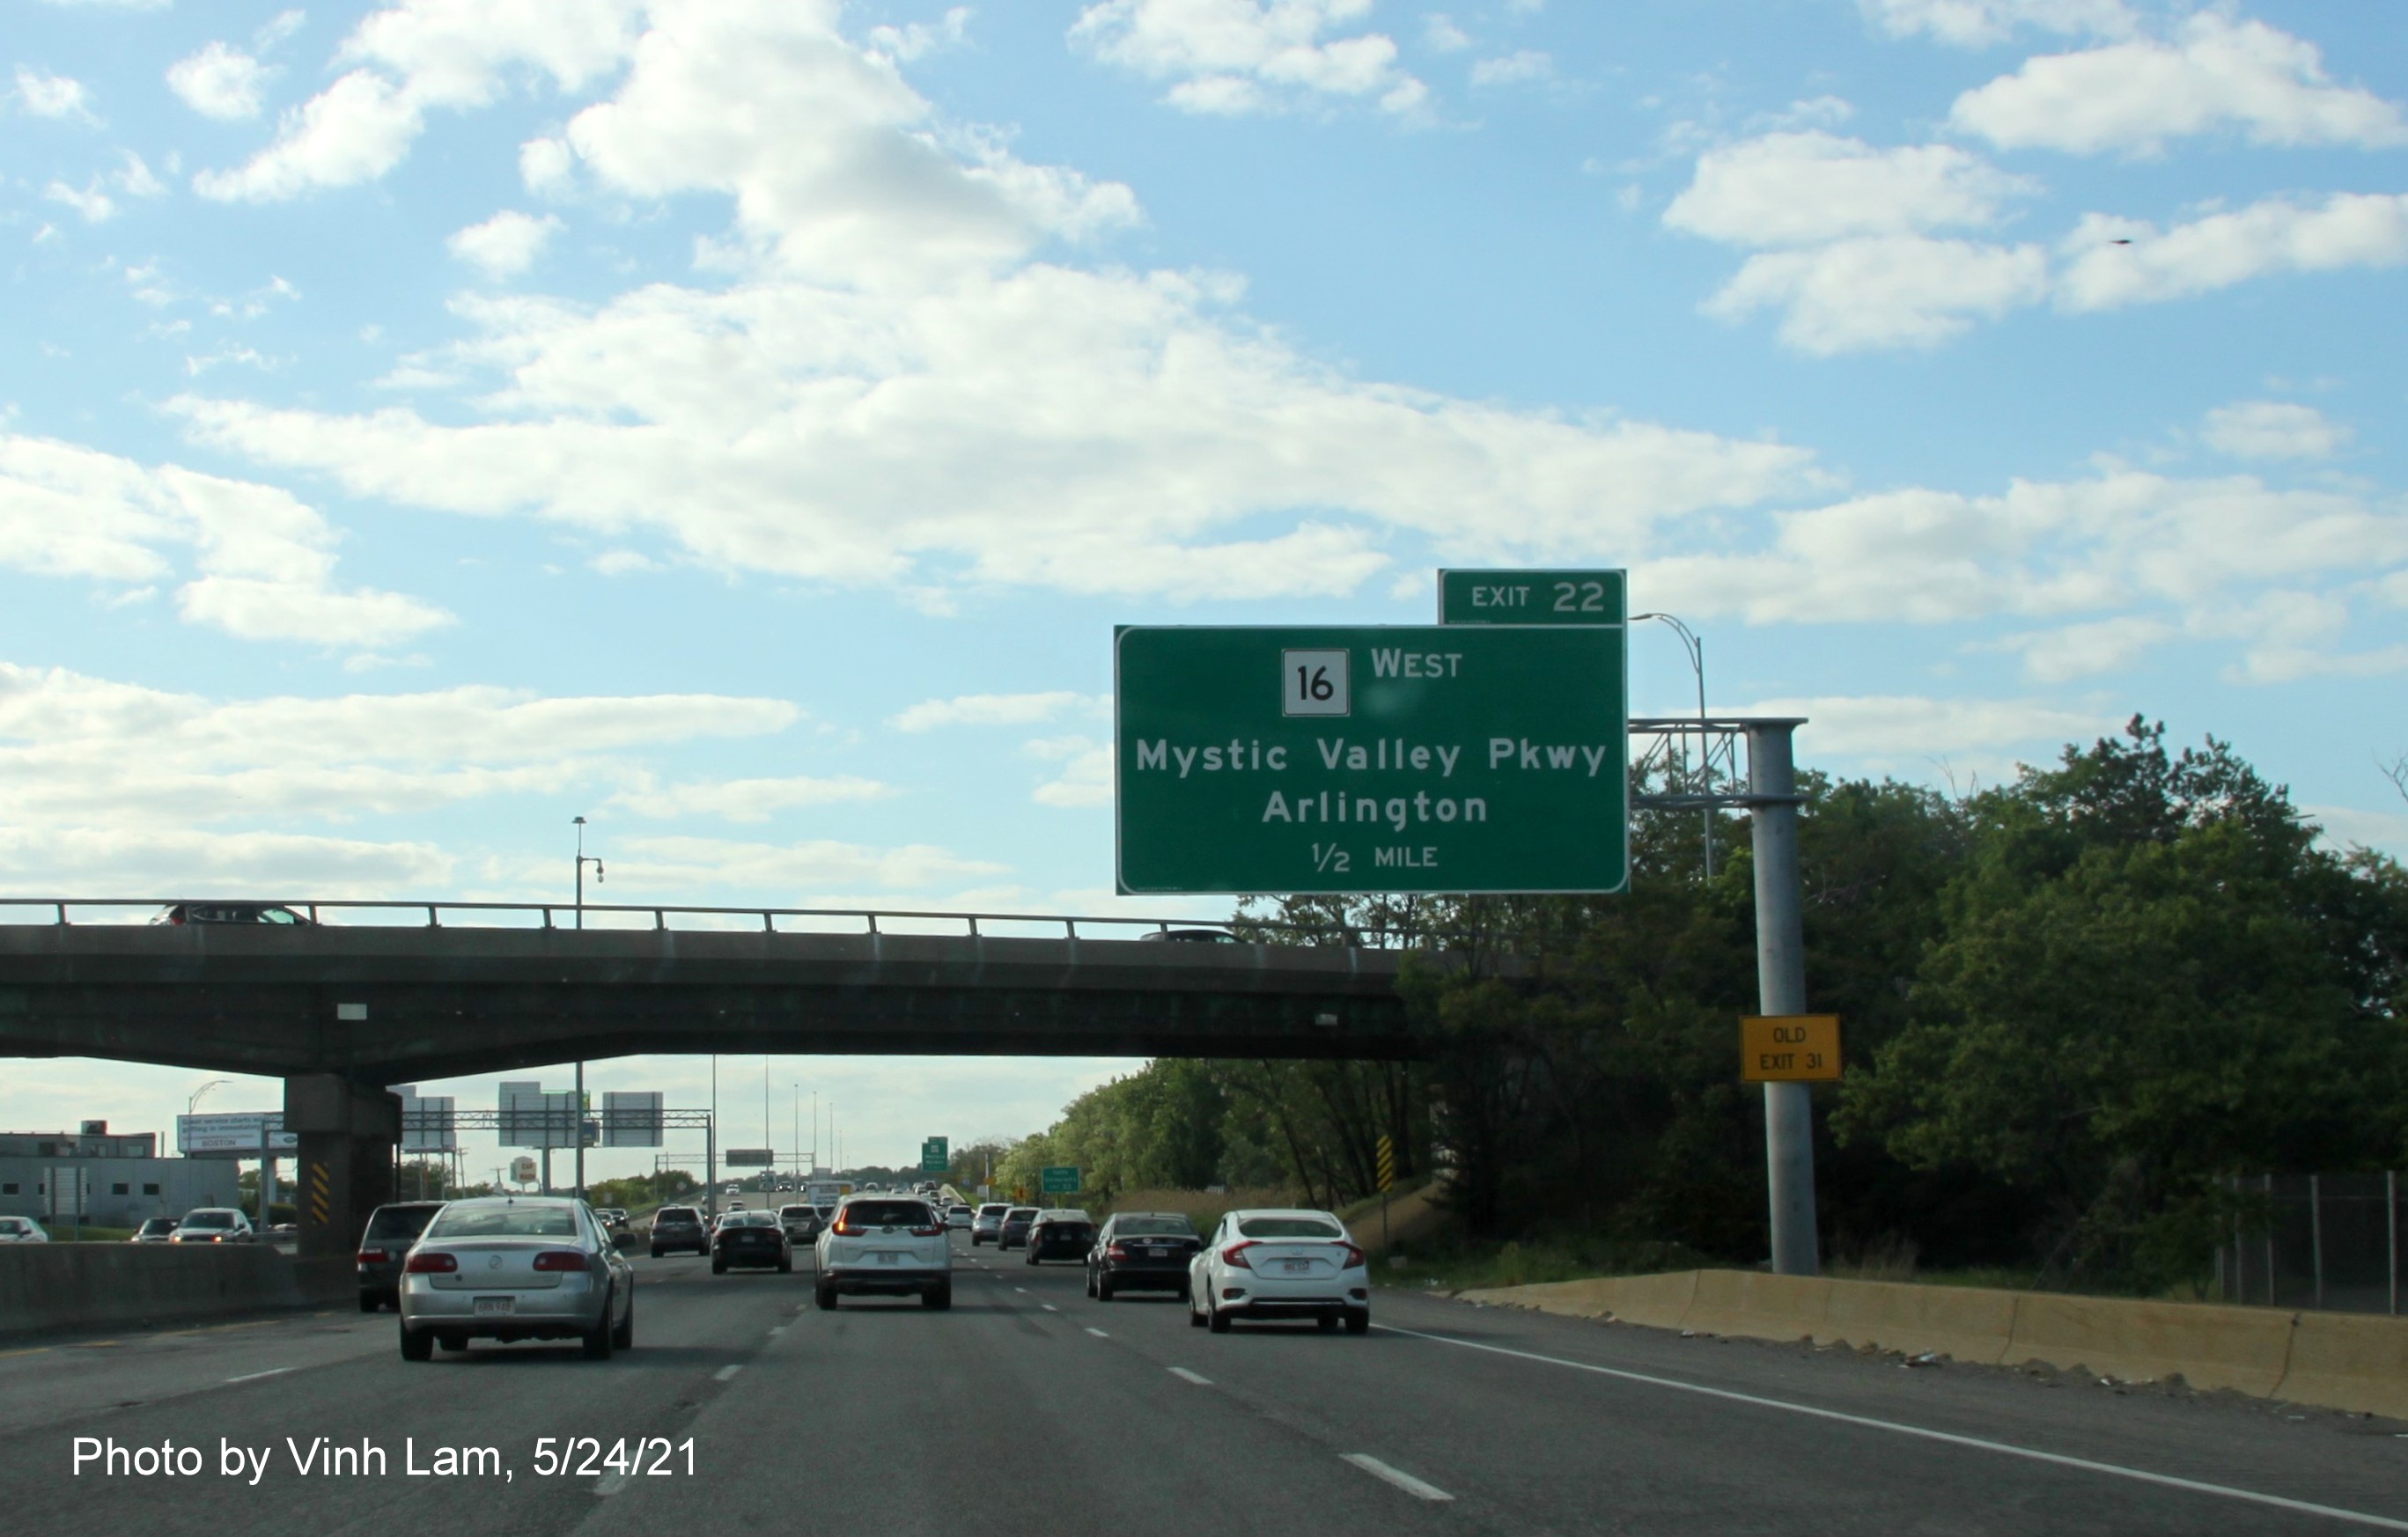 Image of 1/2 mile advance sign for MA 16 West exit with new milepost based exit number on I-93 North in Medford, by Vinh Lam, May 2021